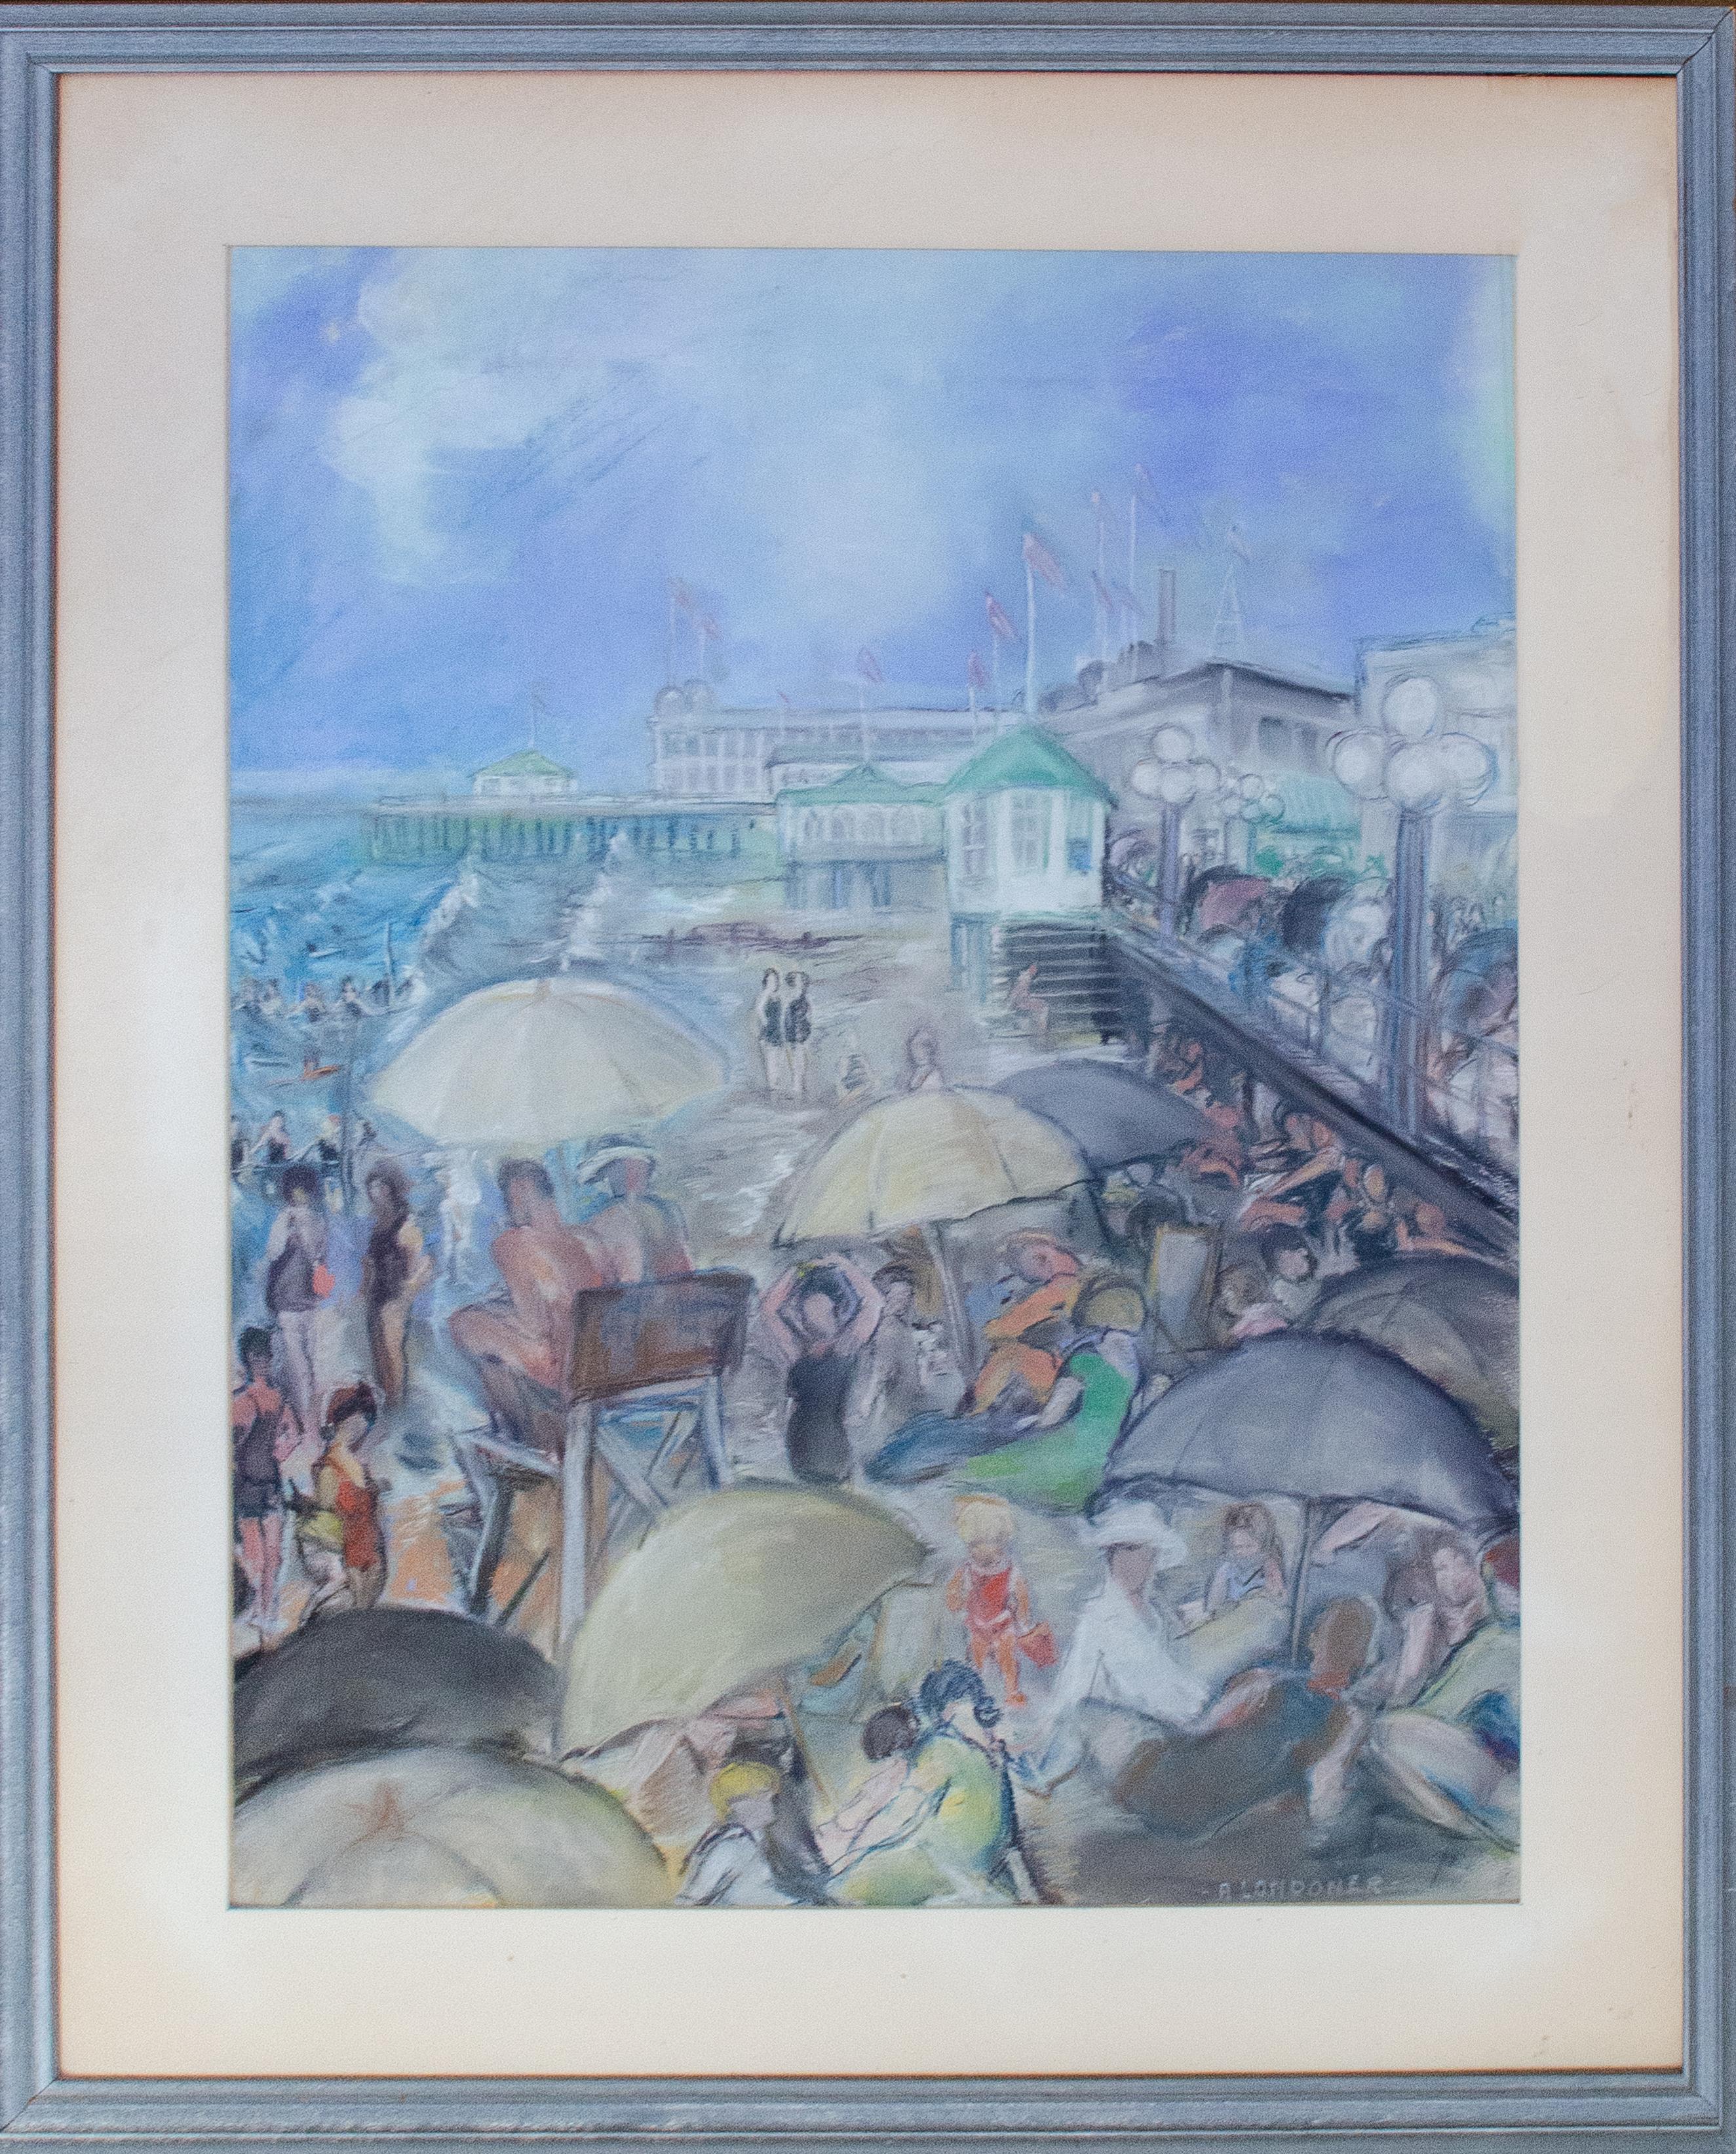 Amy Londoner
Beach at Atlantic City, circa 1922
Signed lower right
Pastel on paper
Sight 23 x 18 inches

Amy Londoner (April 12, 1875 – 1951) was an American painter who exhibited at the 1913 Armory Show. One of the first students of the Henri